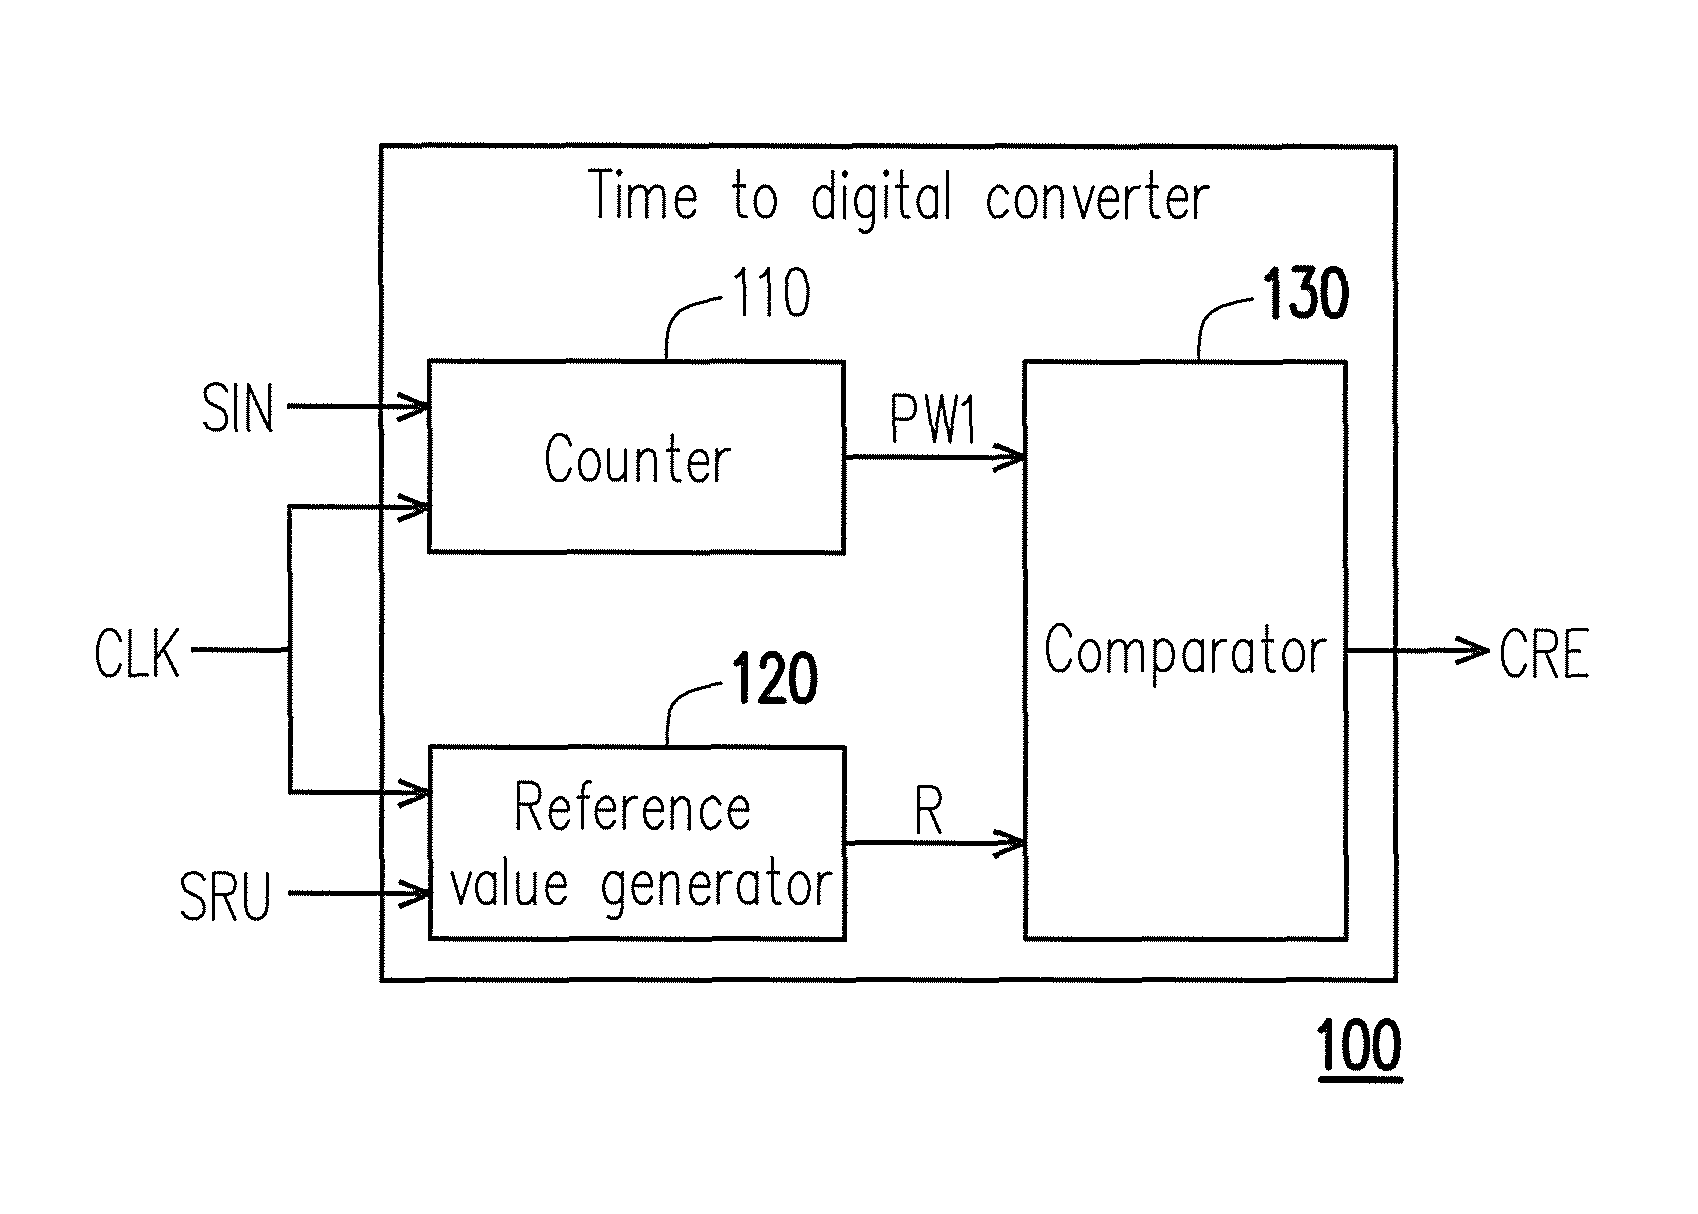 Time to digital converter with high resolution